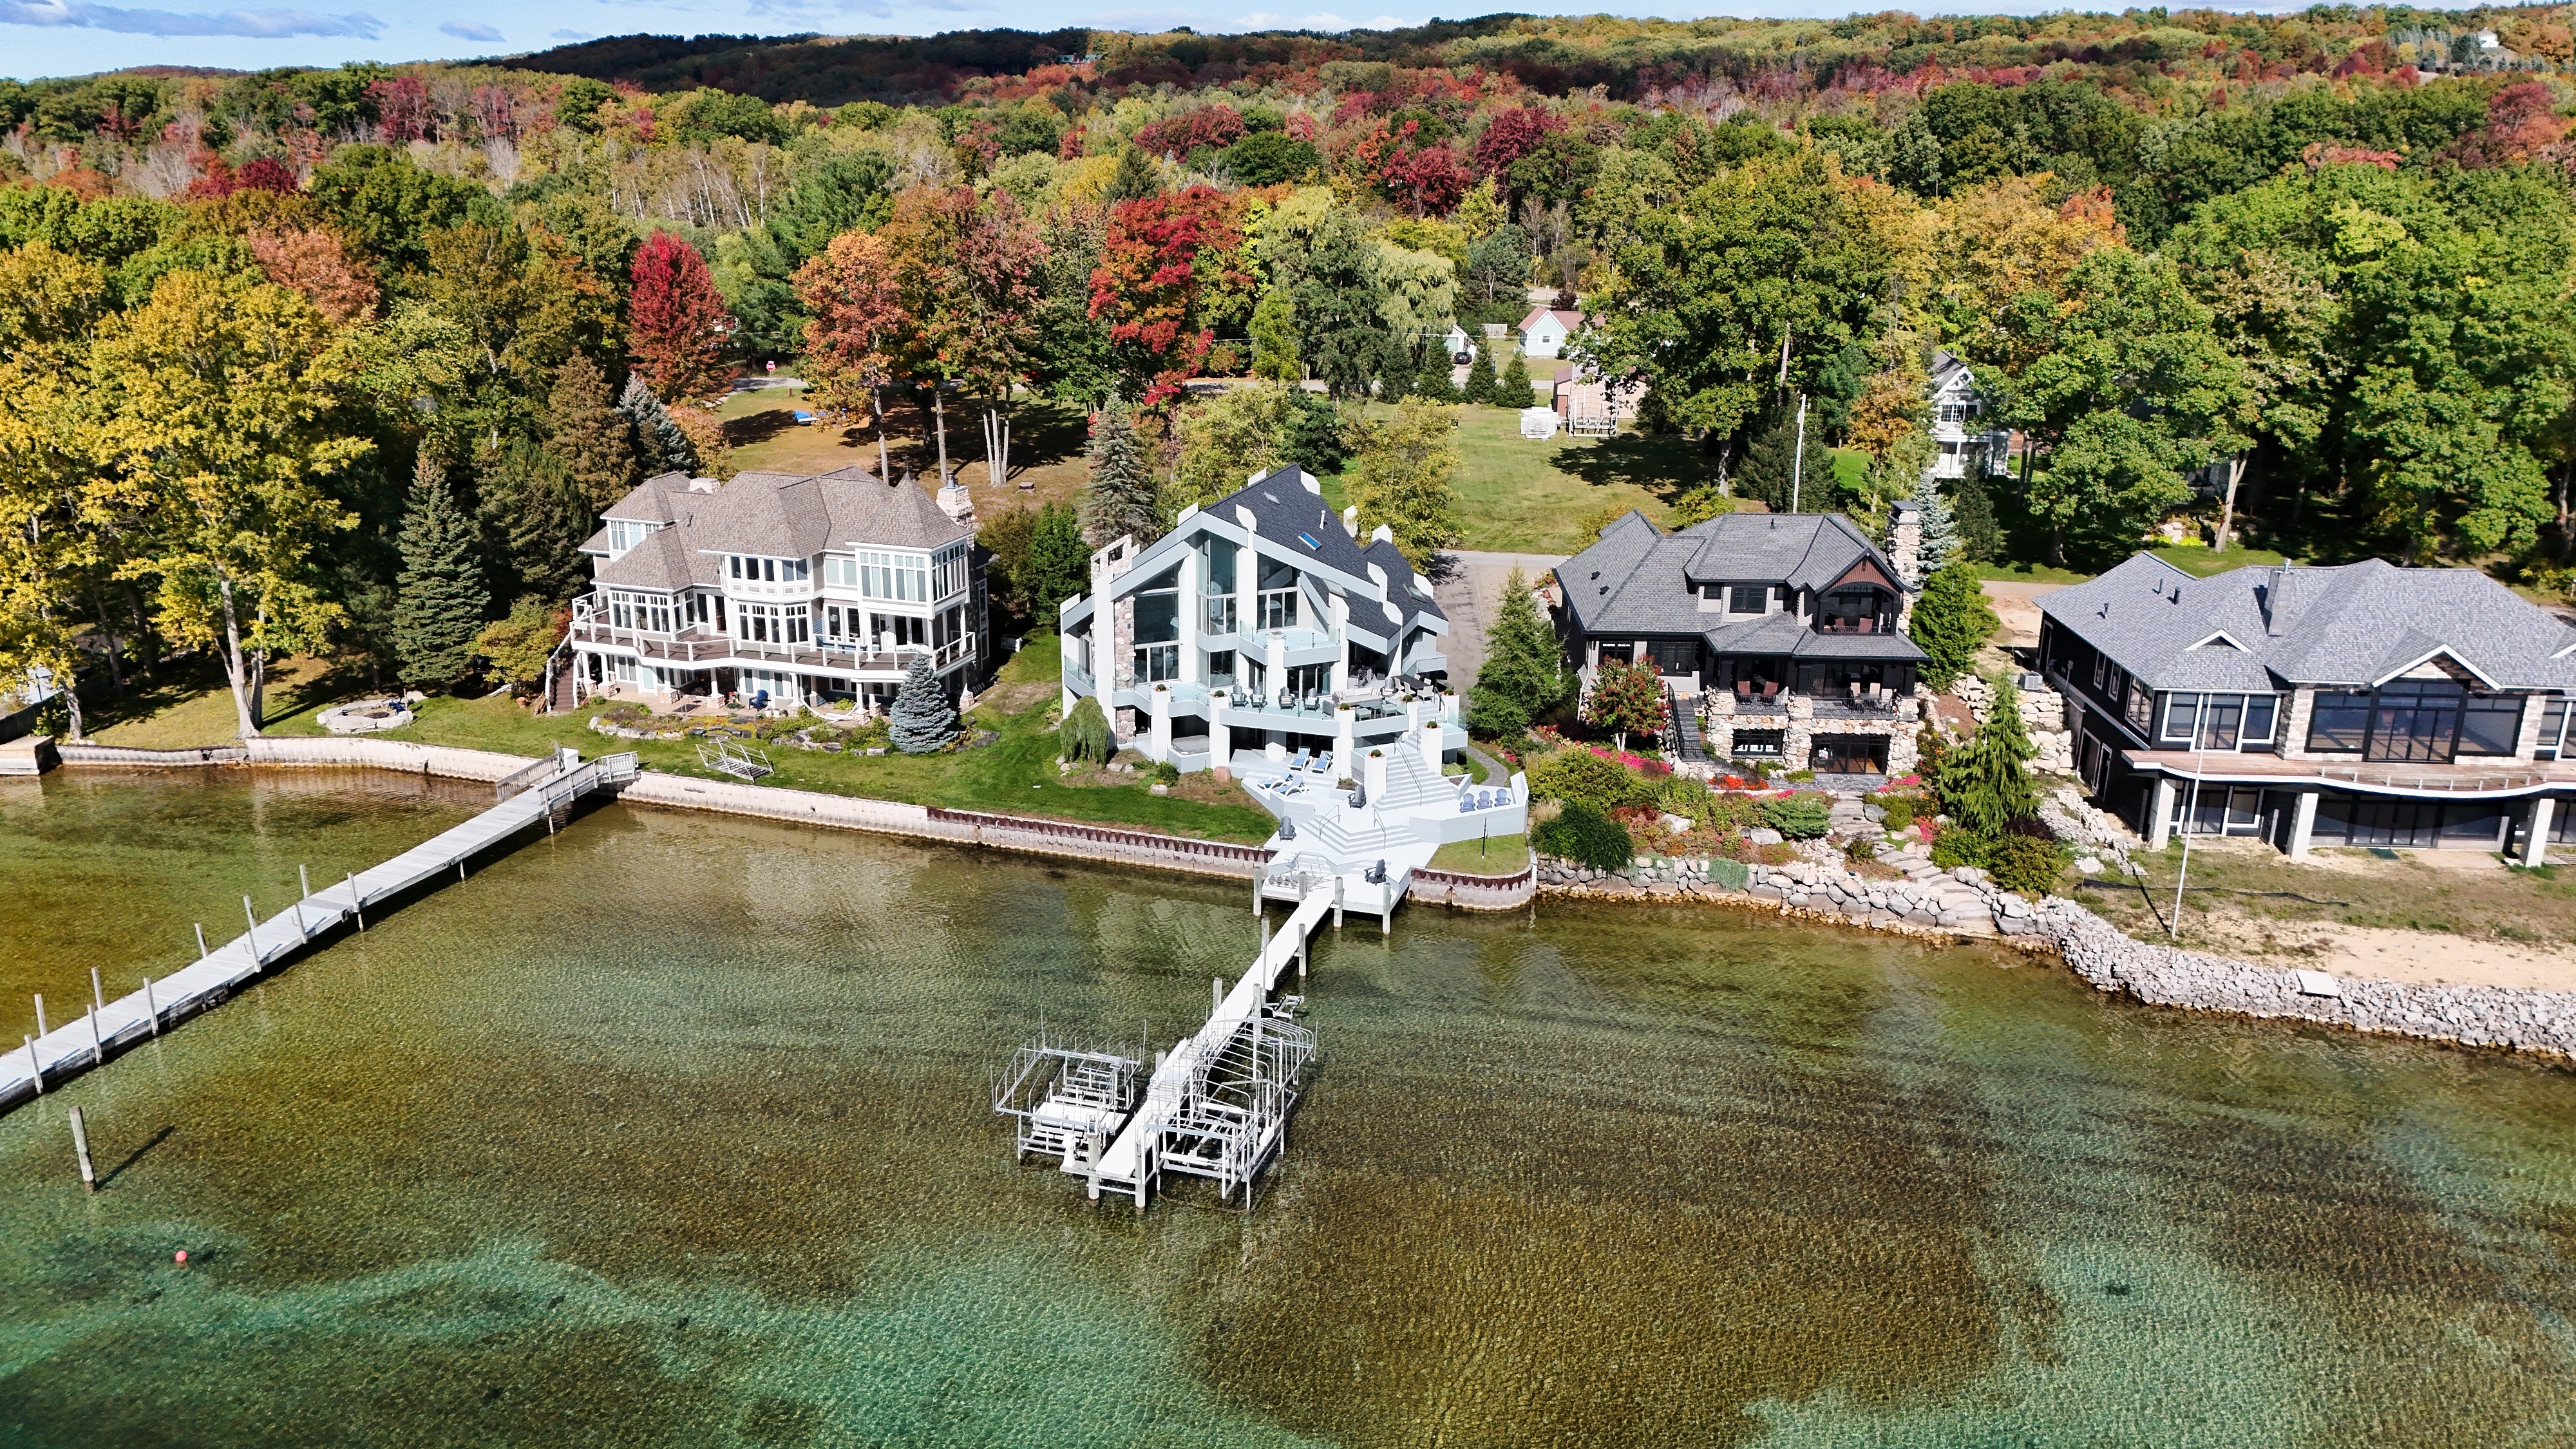 Picture of 549 Bay Street in Boyne City, Michigan on Lake Charlevoix